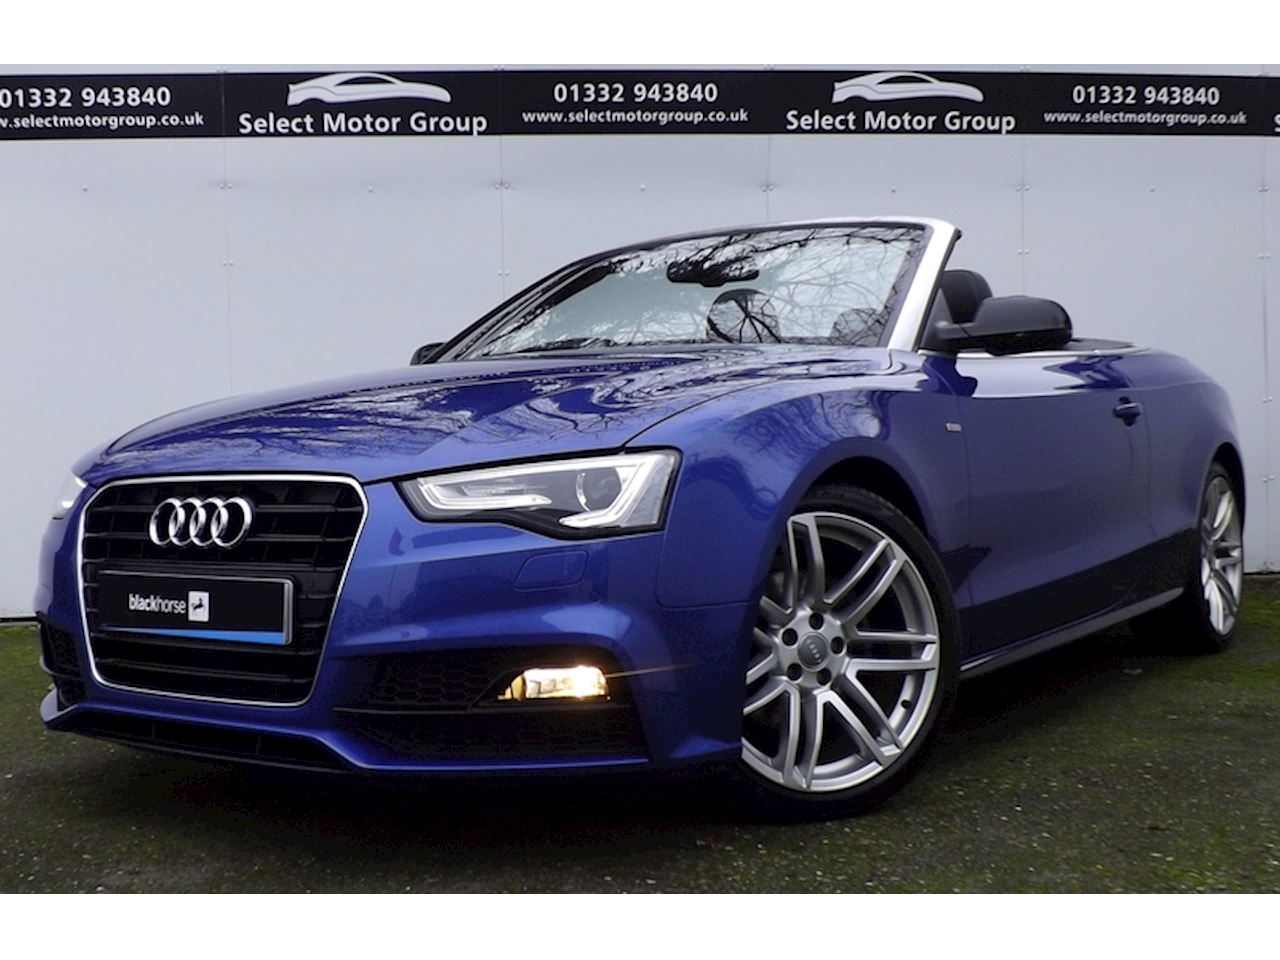 A5 Cabriolet 2.0 TDI 190 S Line Special Edition Plus 2dr Convertible Automatic Diesel